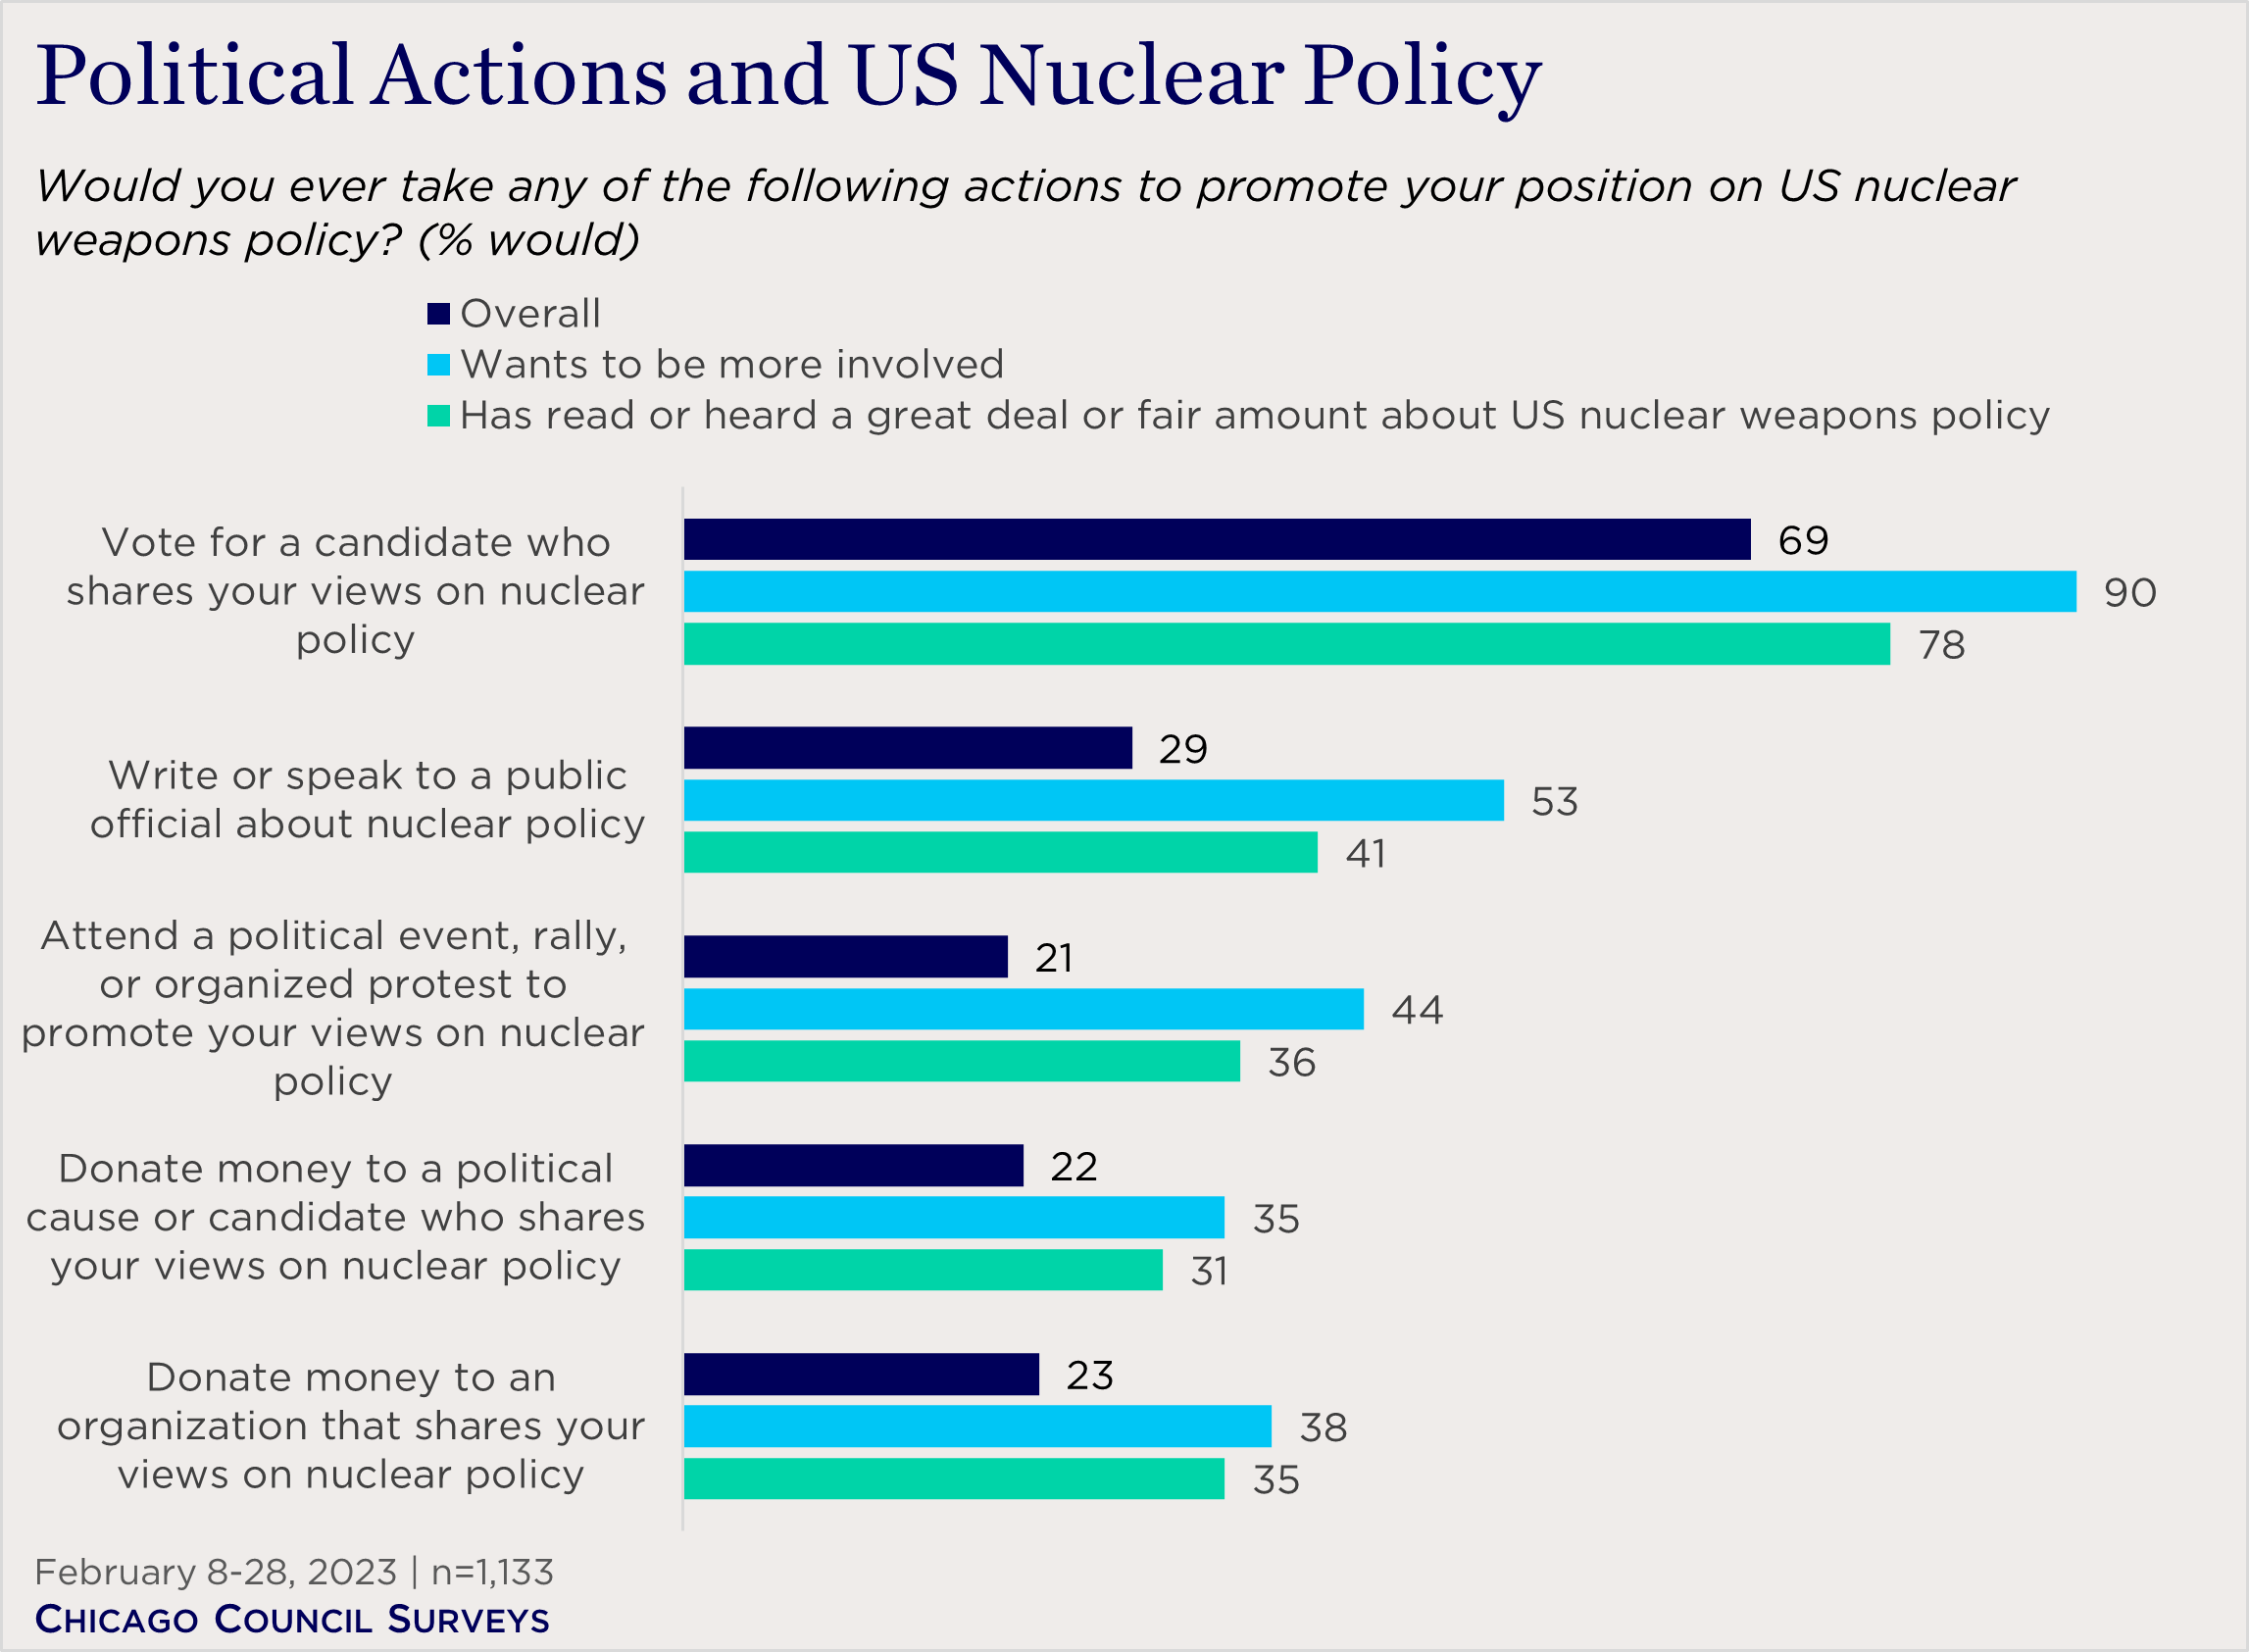 "bar chart showing willingness to take political actions on nuclear policy"